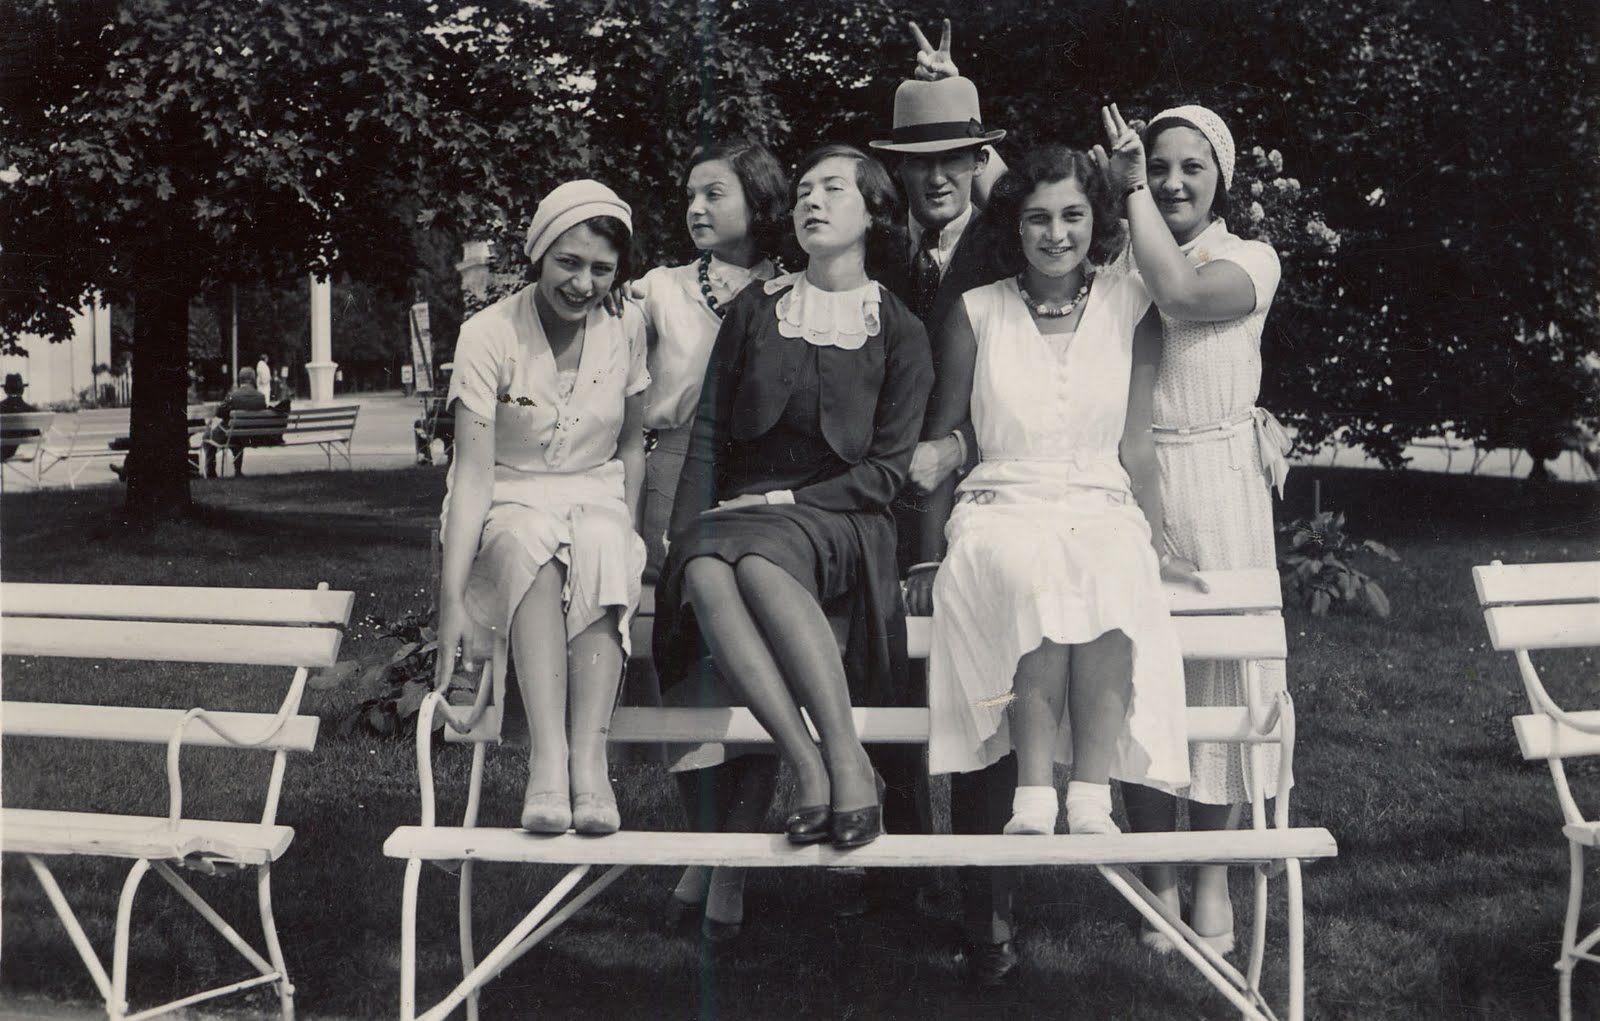 Family photograph of 5 women and one man at a park bench. The woman on the right holds up two fingers behind each of the two people next to her to make donkey ears. 